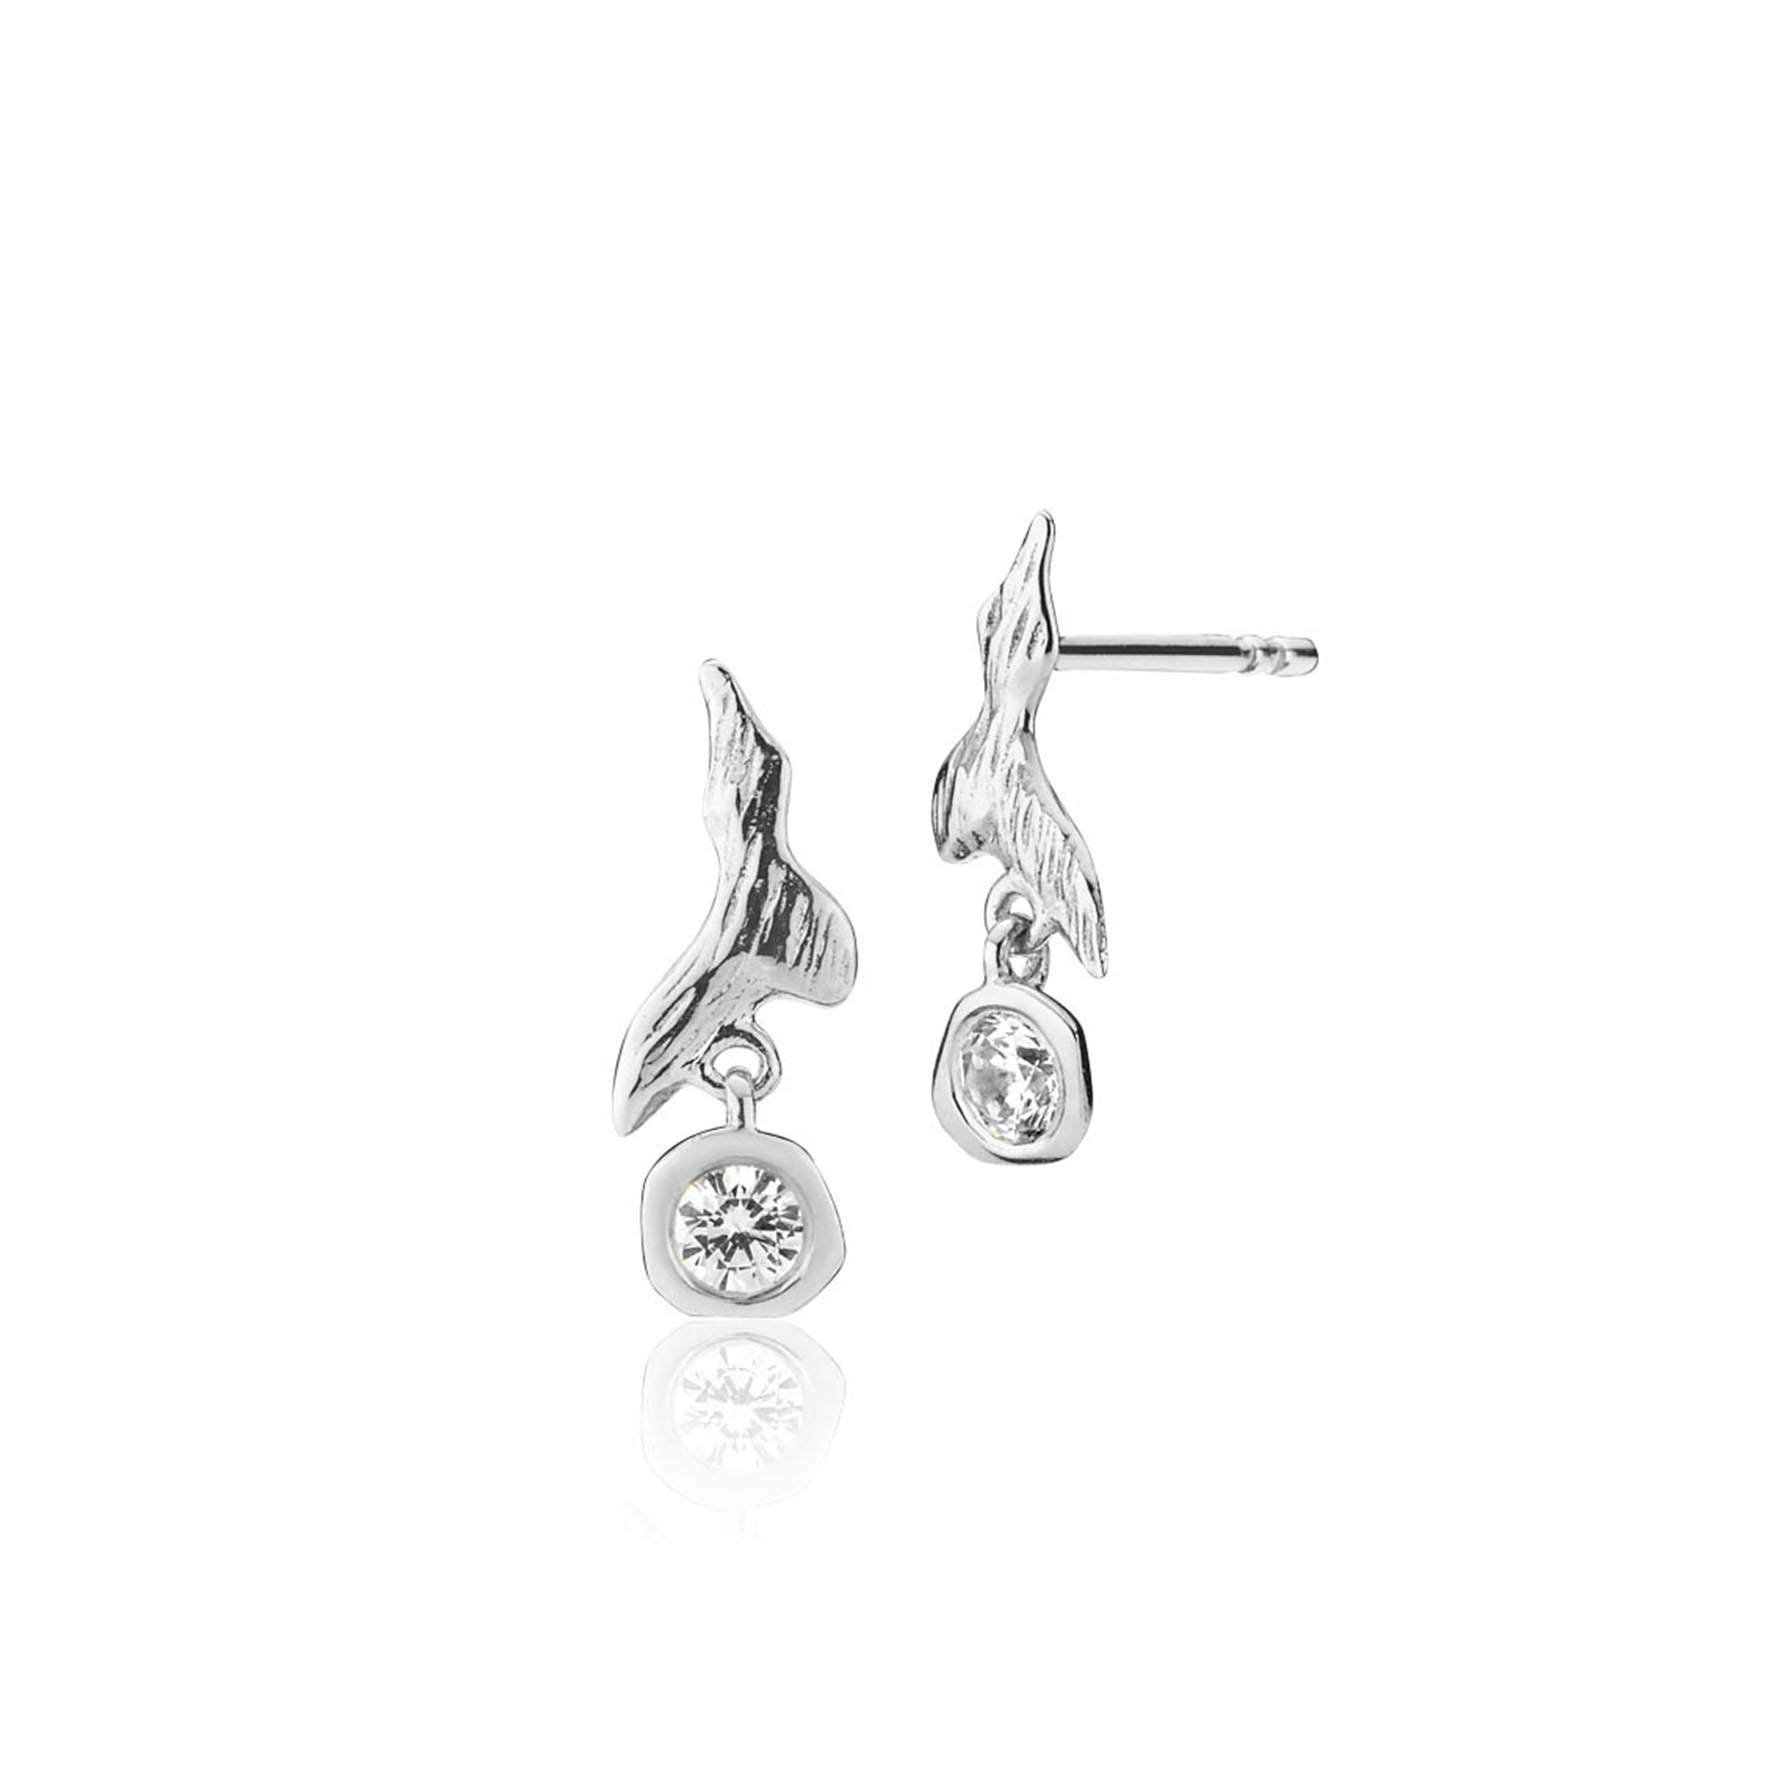 Fairy Earrings With Stone from Izabel Camille in Silver Sterling 925|